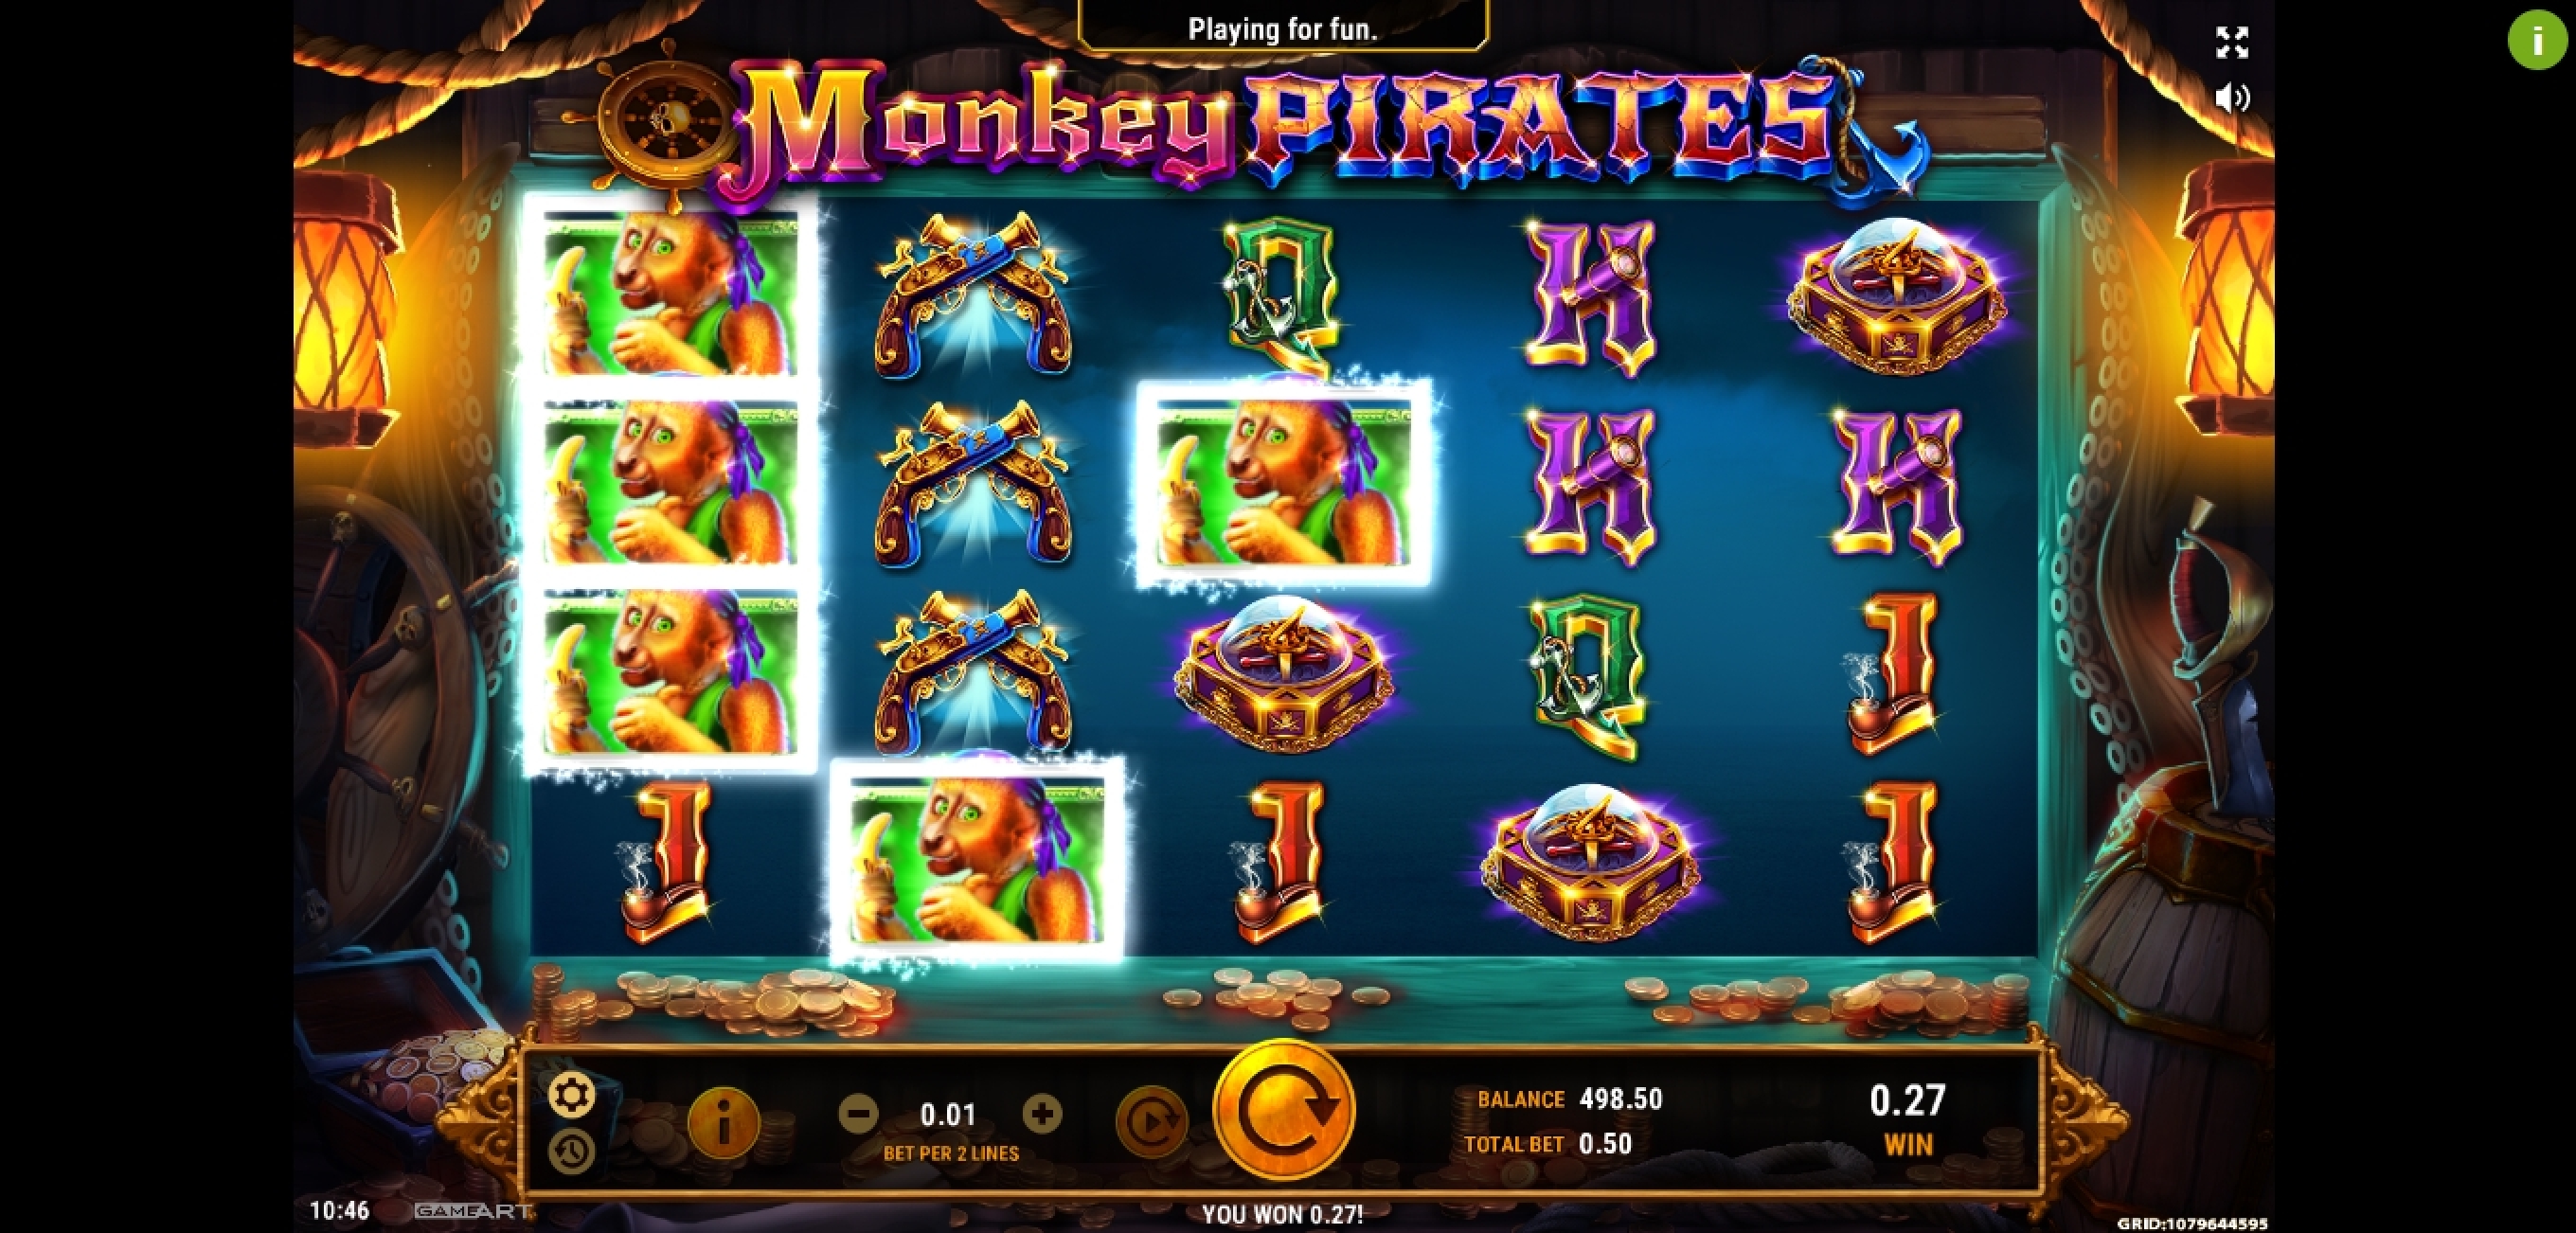 Win Money in Monkey Pirates Free Slot Game by GameArt